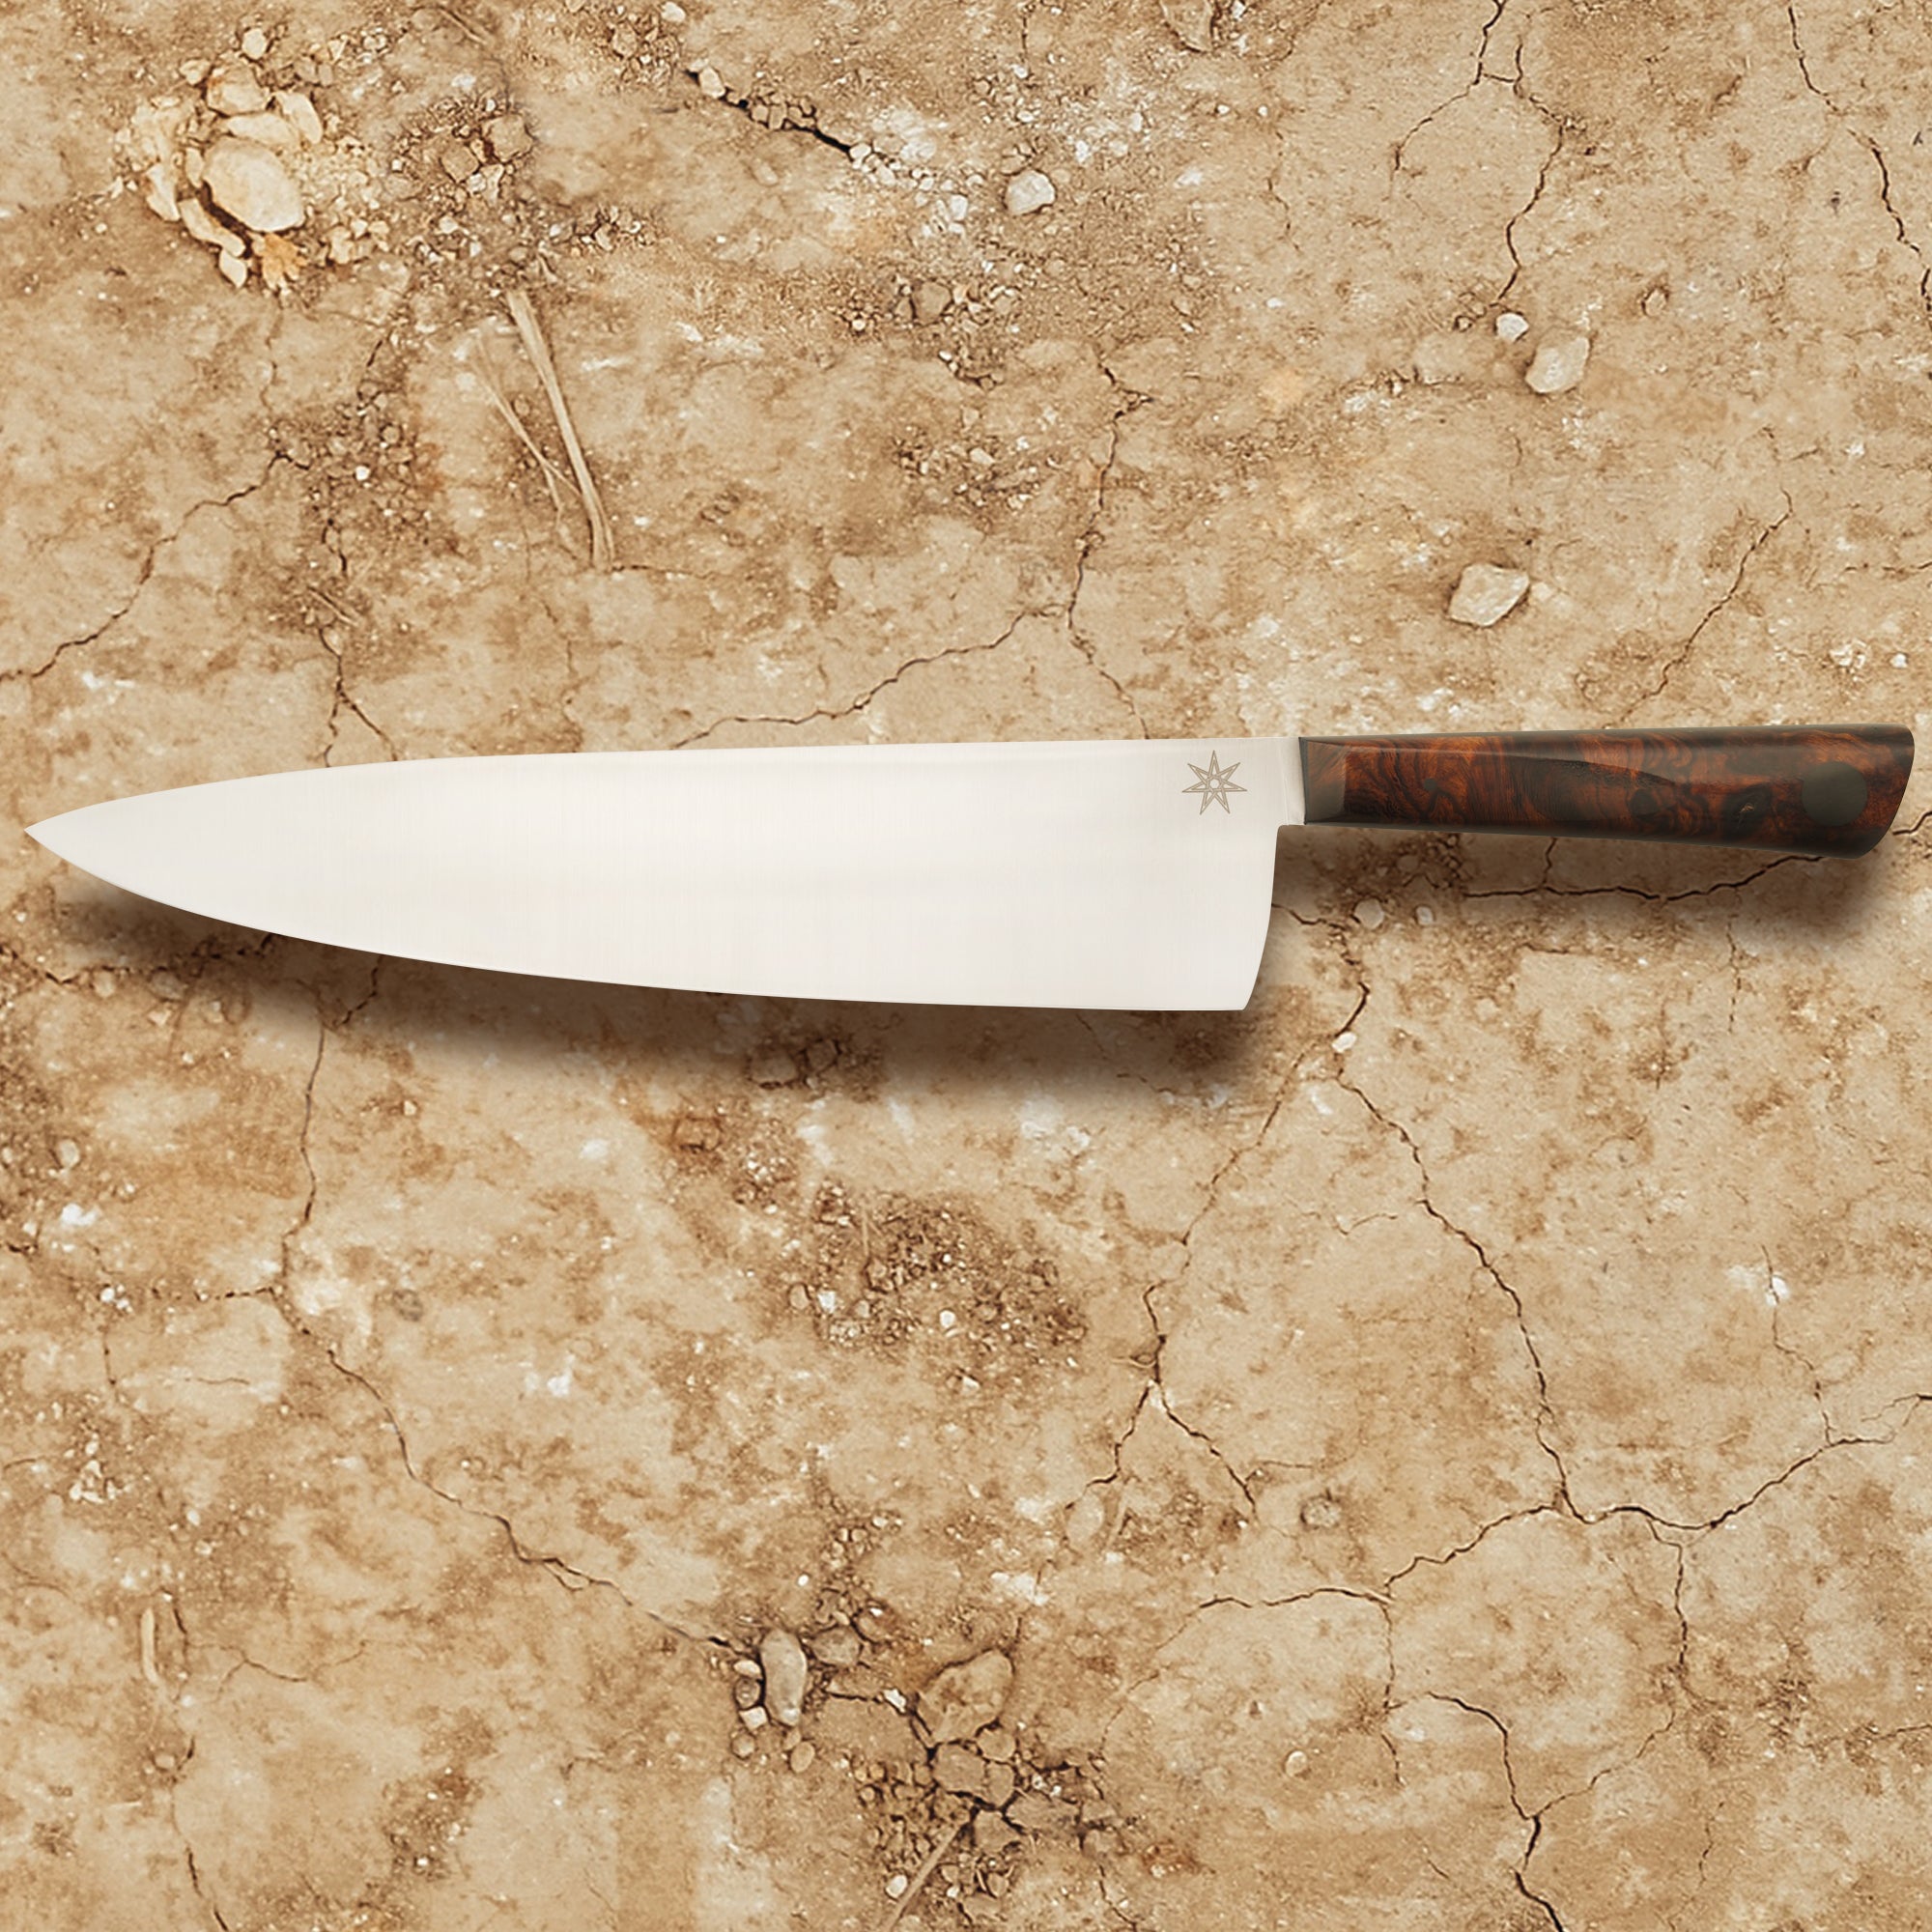 Town Cutler 10" Chef knife with stain-resistant steel blade. Desert ironwood wood handle kitchen knife.